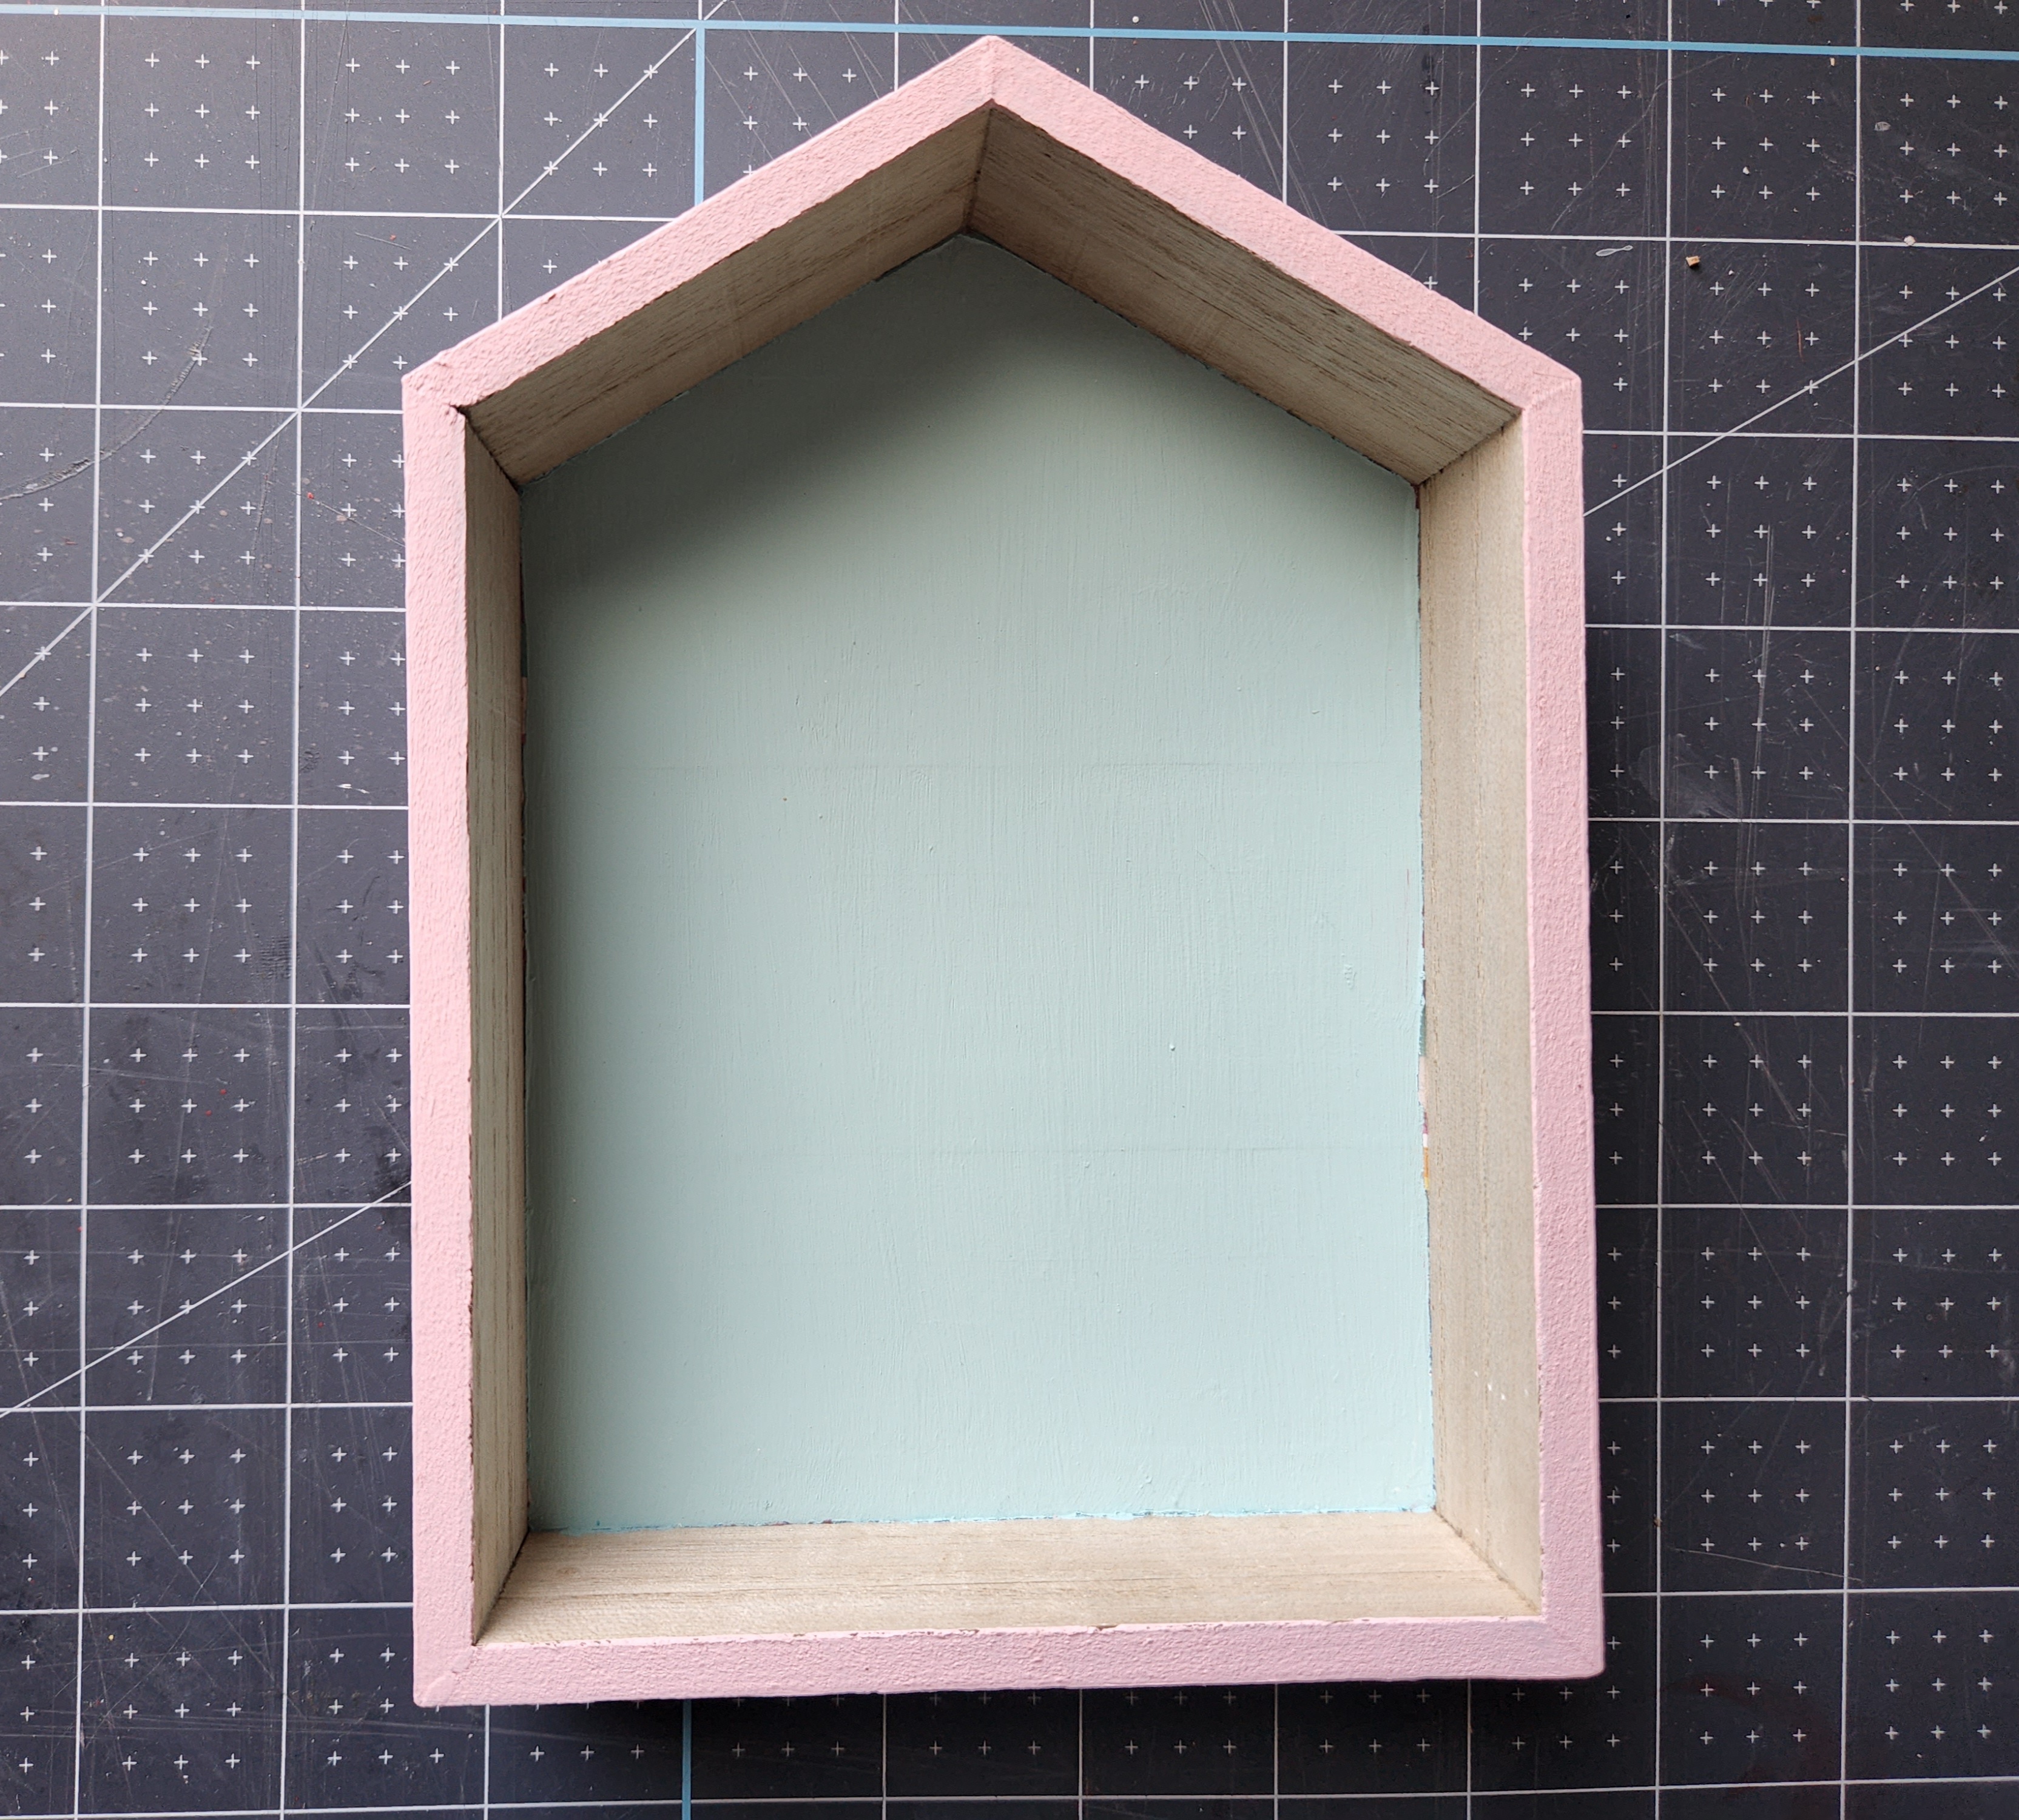 Spring Dollar Tree house with the outside painted with pink chalk paint and the inside panel painted robin's egg blue.